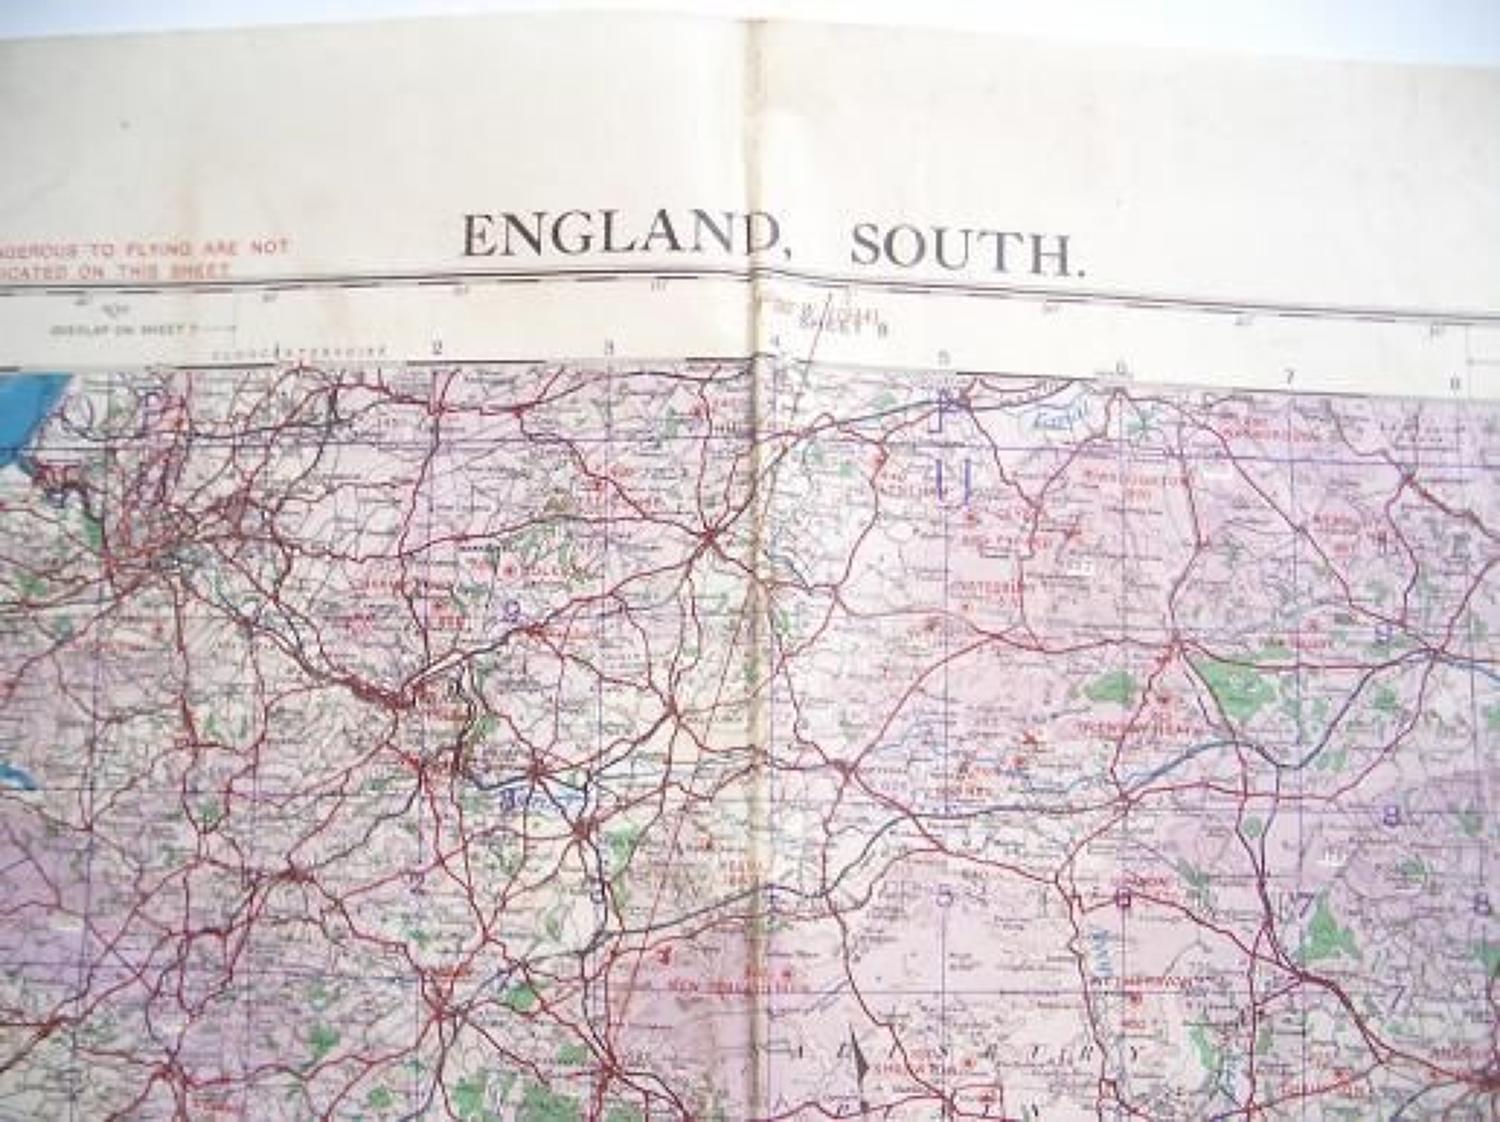 WW2 1943 Military Map of South England.